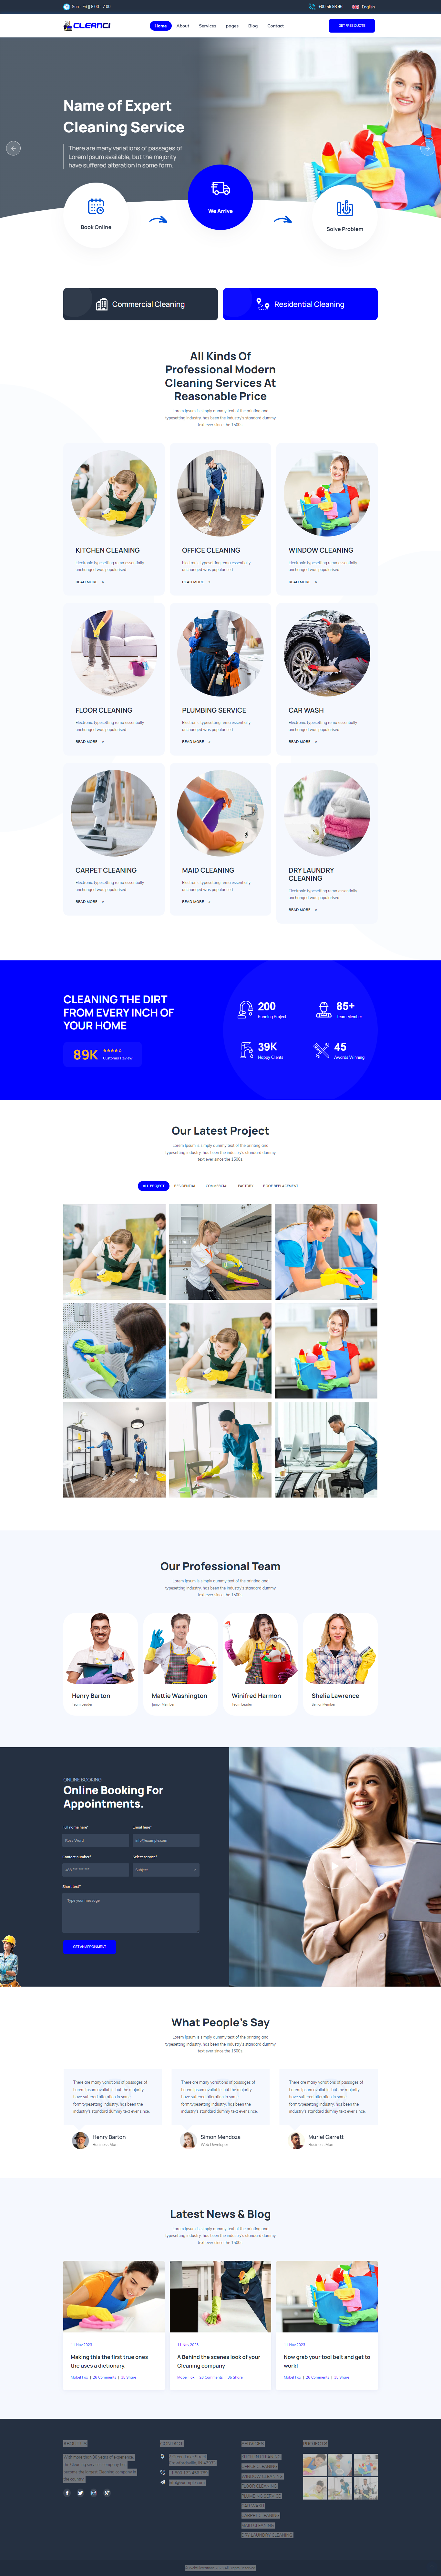 Cleanci - Cleaning Service HTML5 Template